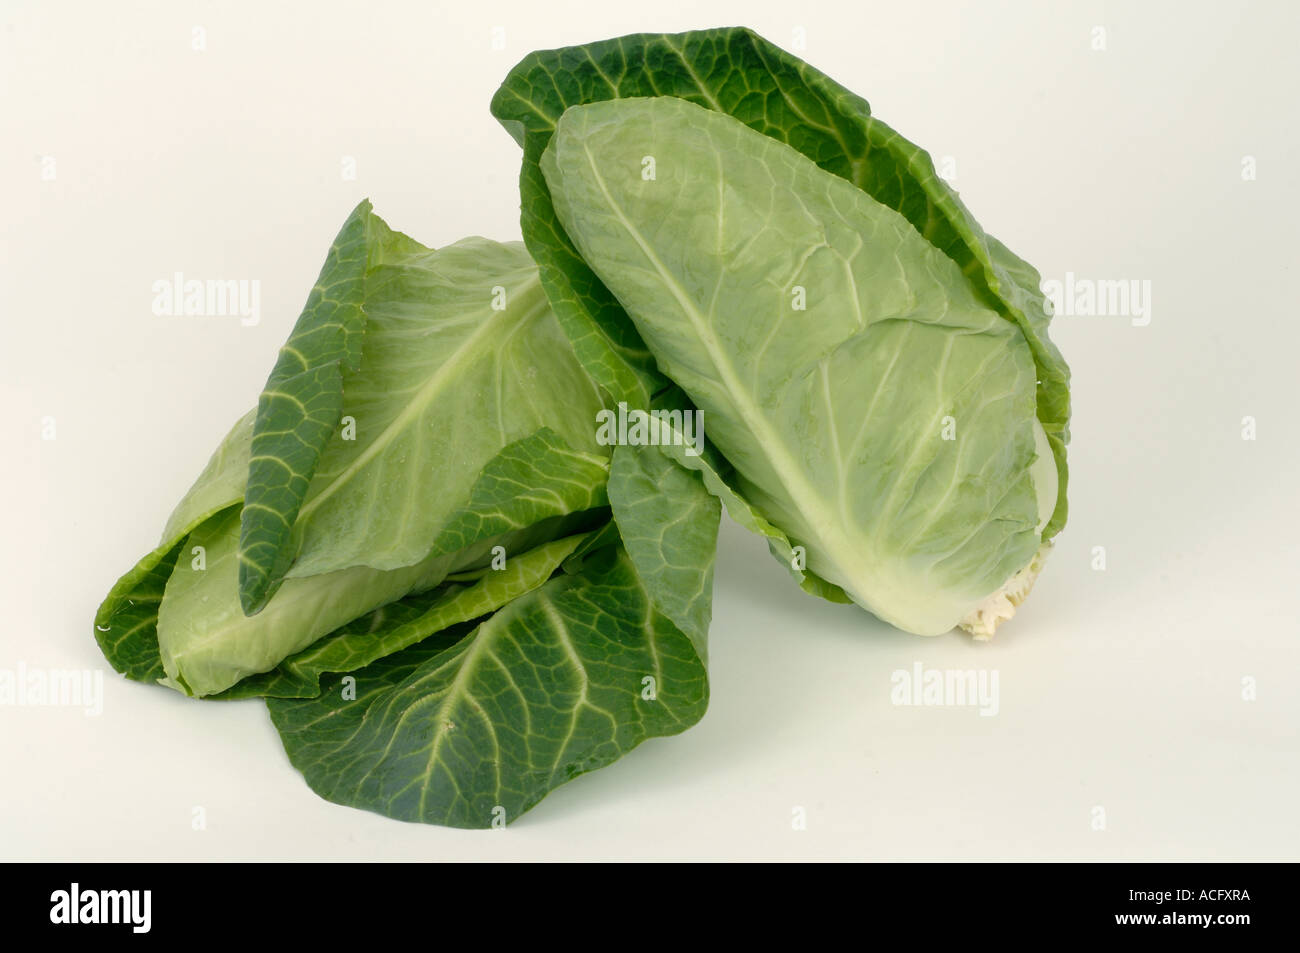 Vegetable produce typical supermarket bought pointed cabbages Stock Photo